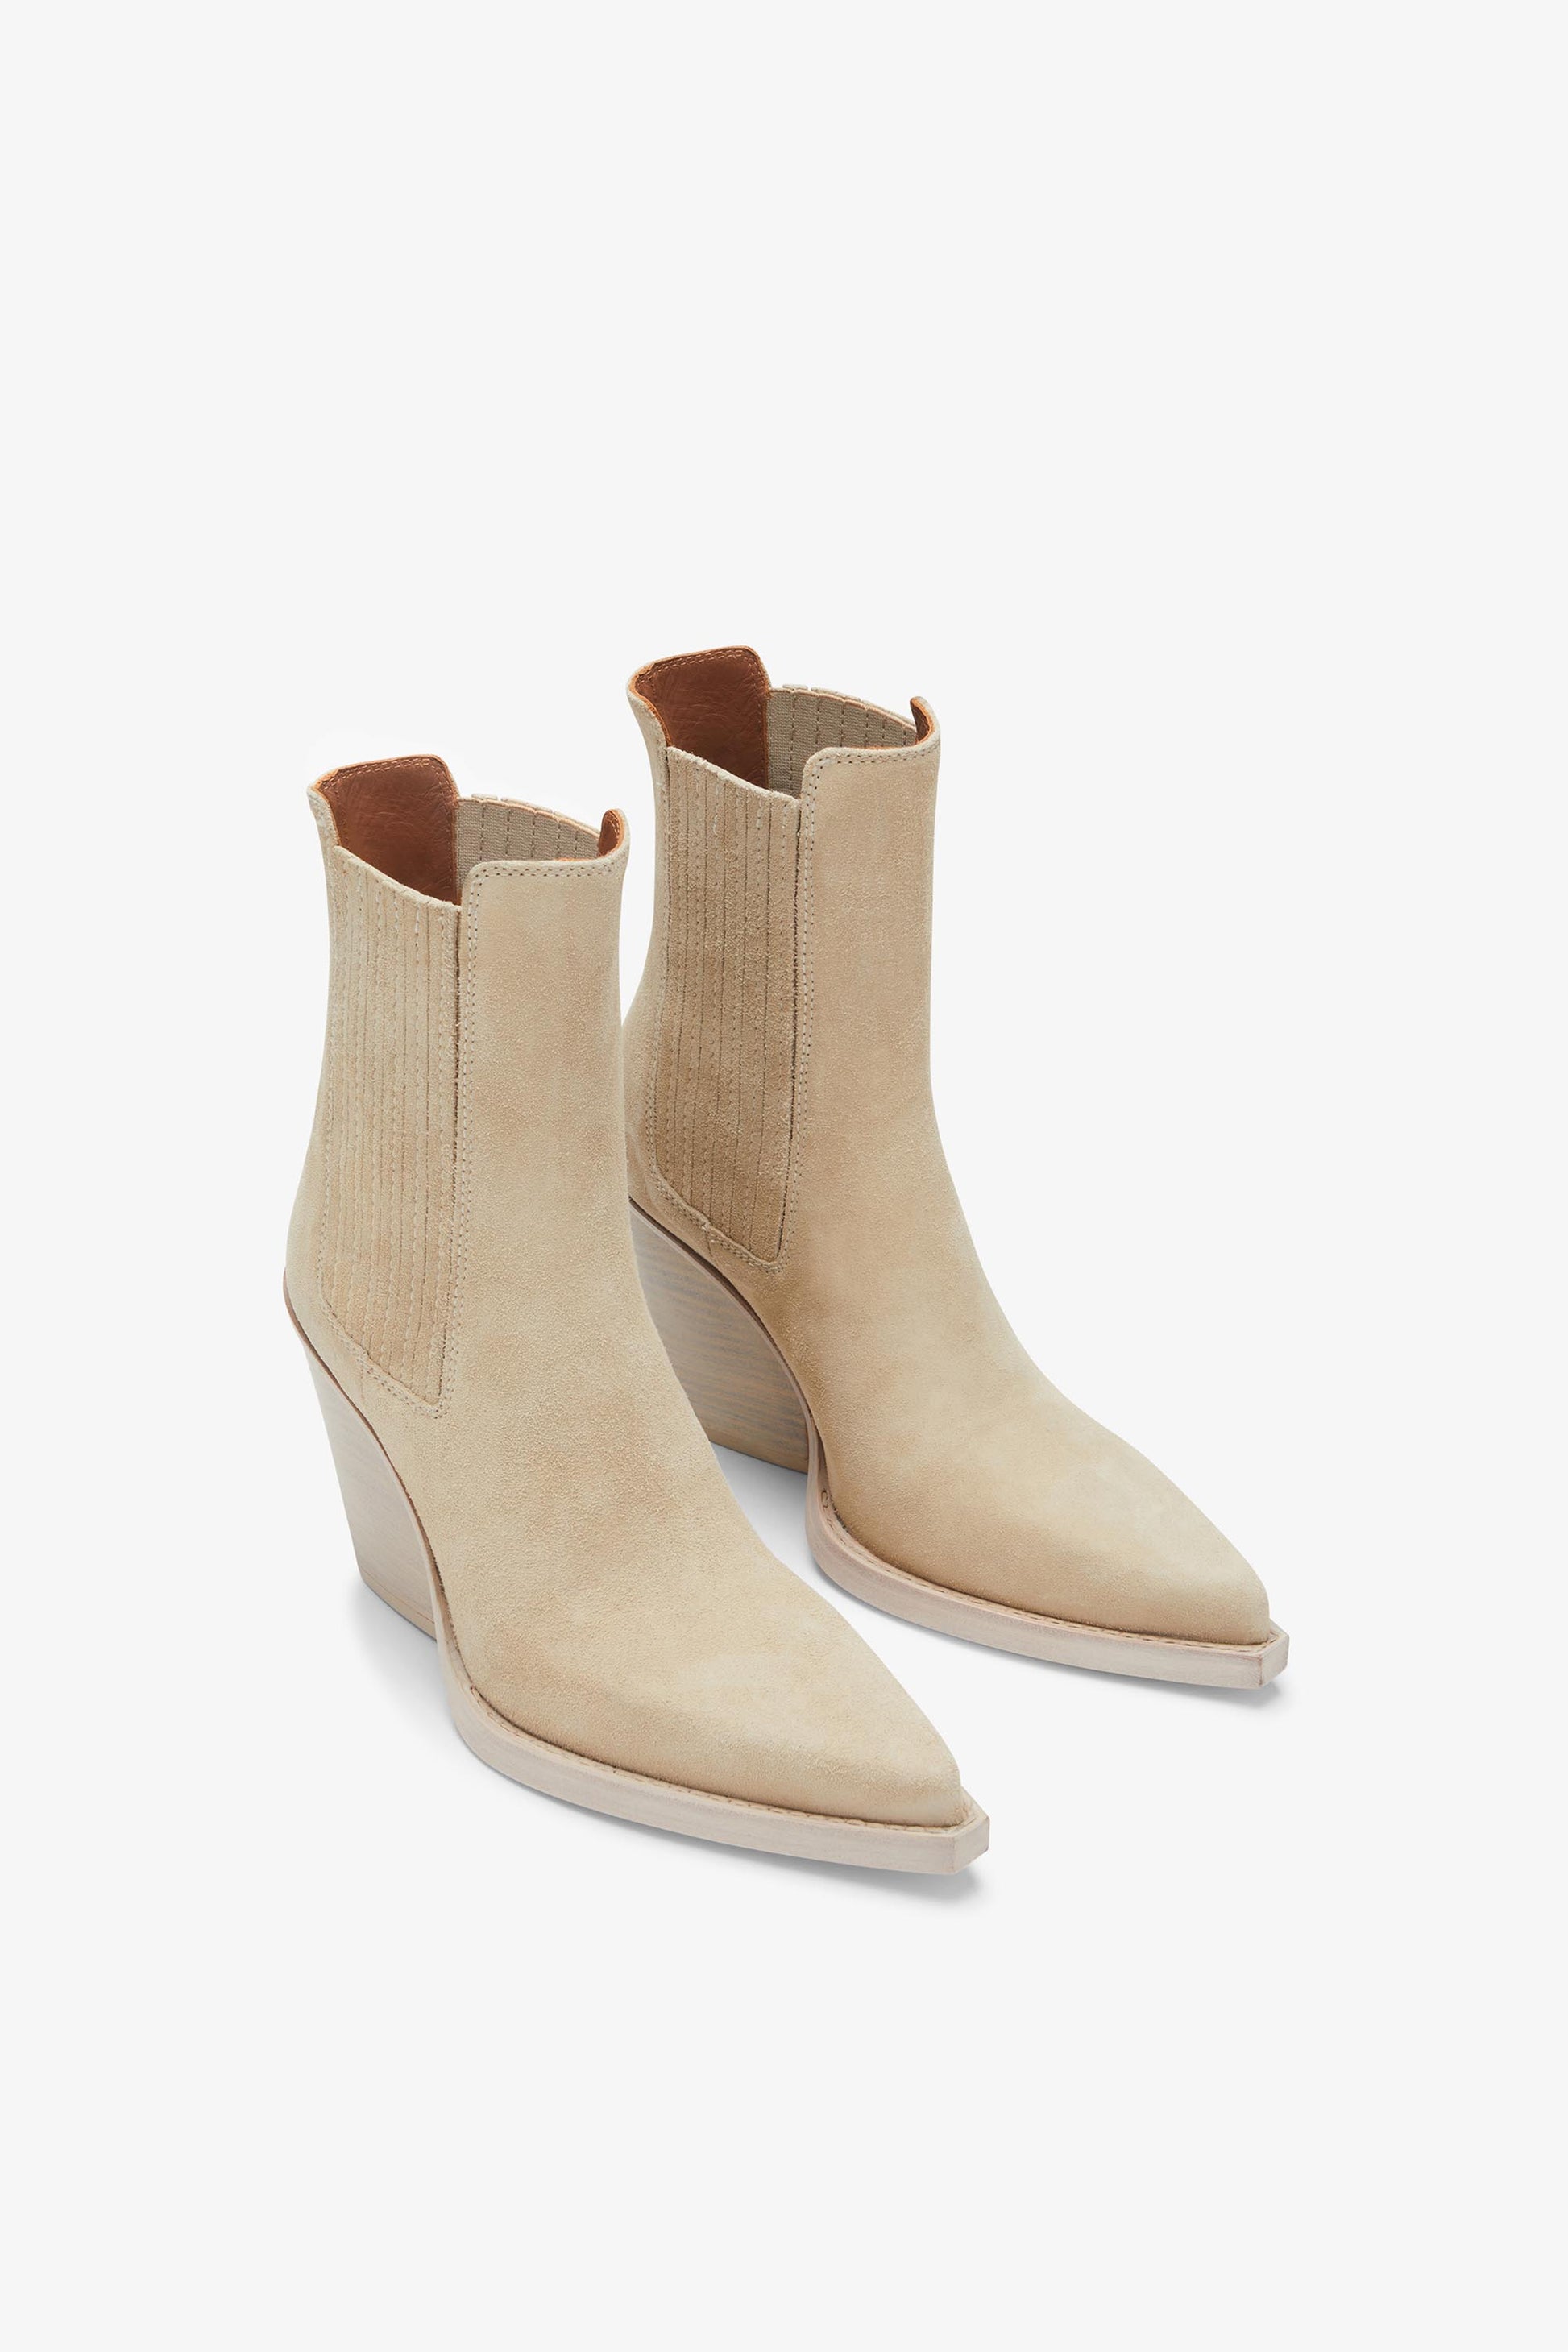 Angora calf suede ankle boots